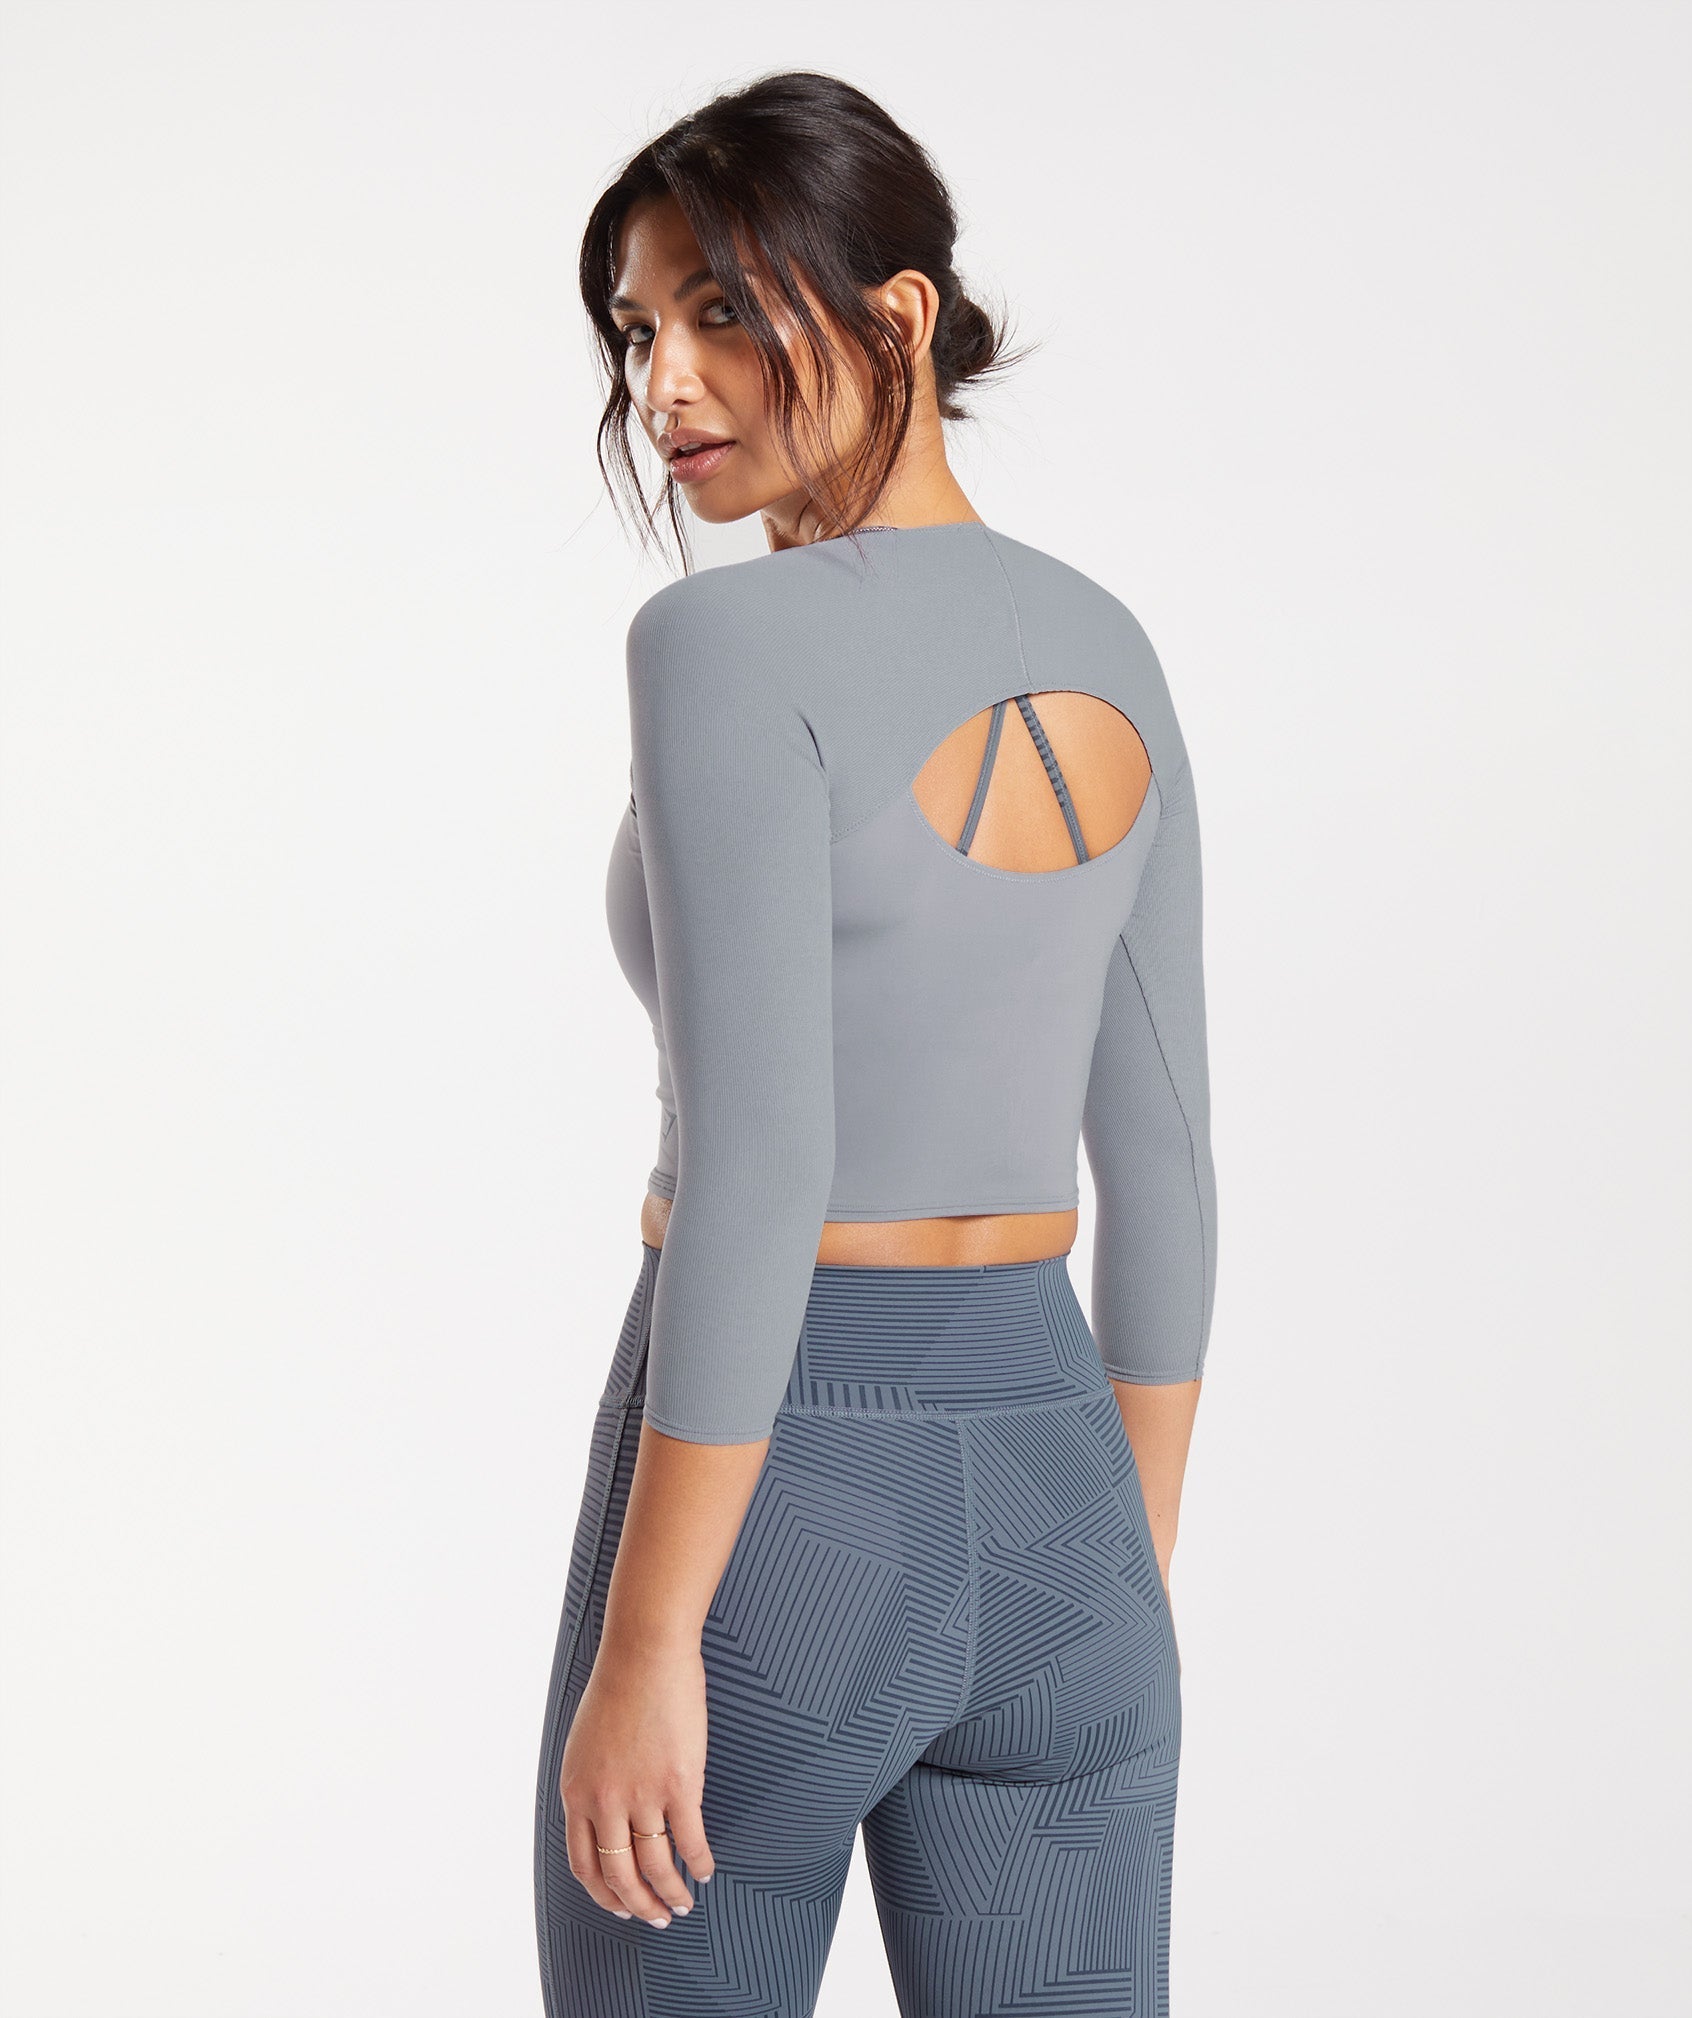 Elevate – The athleisure collection from Gymshark